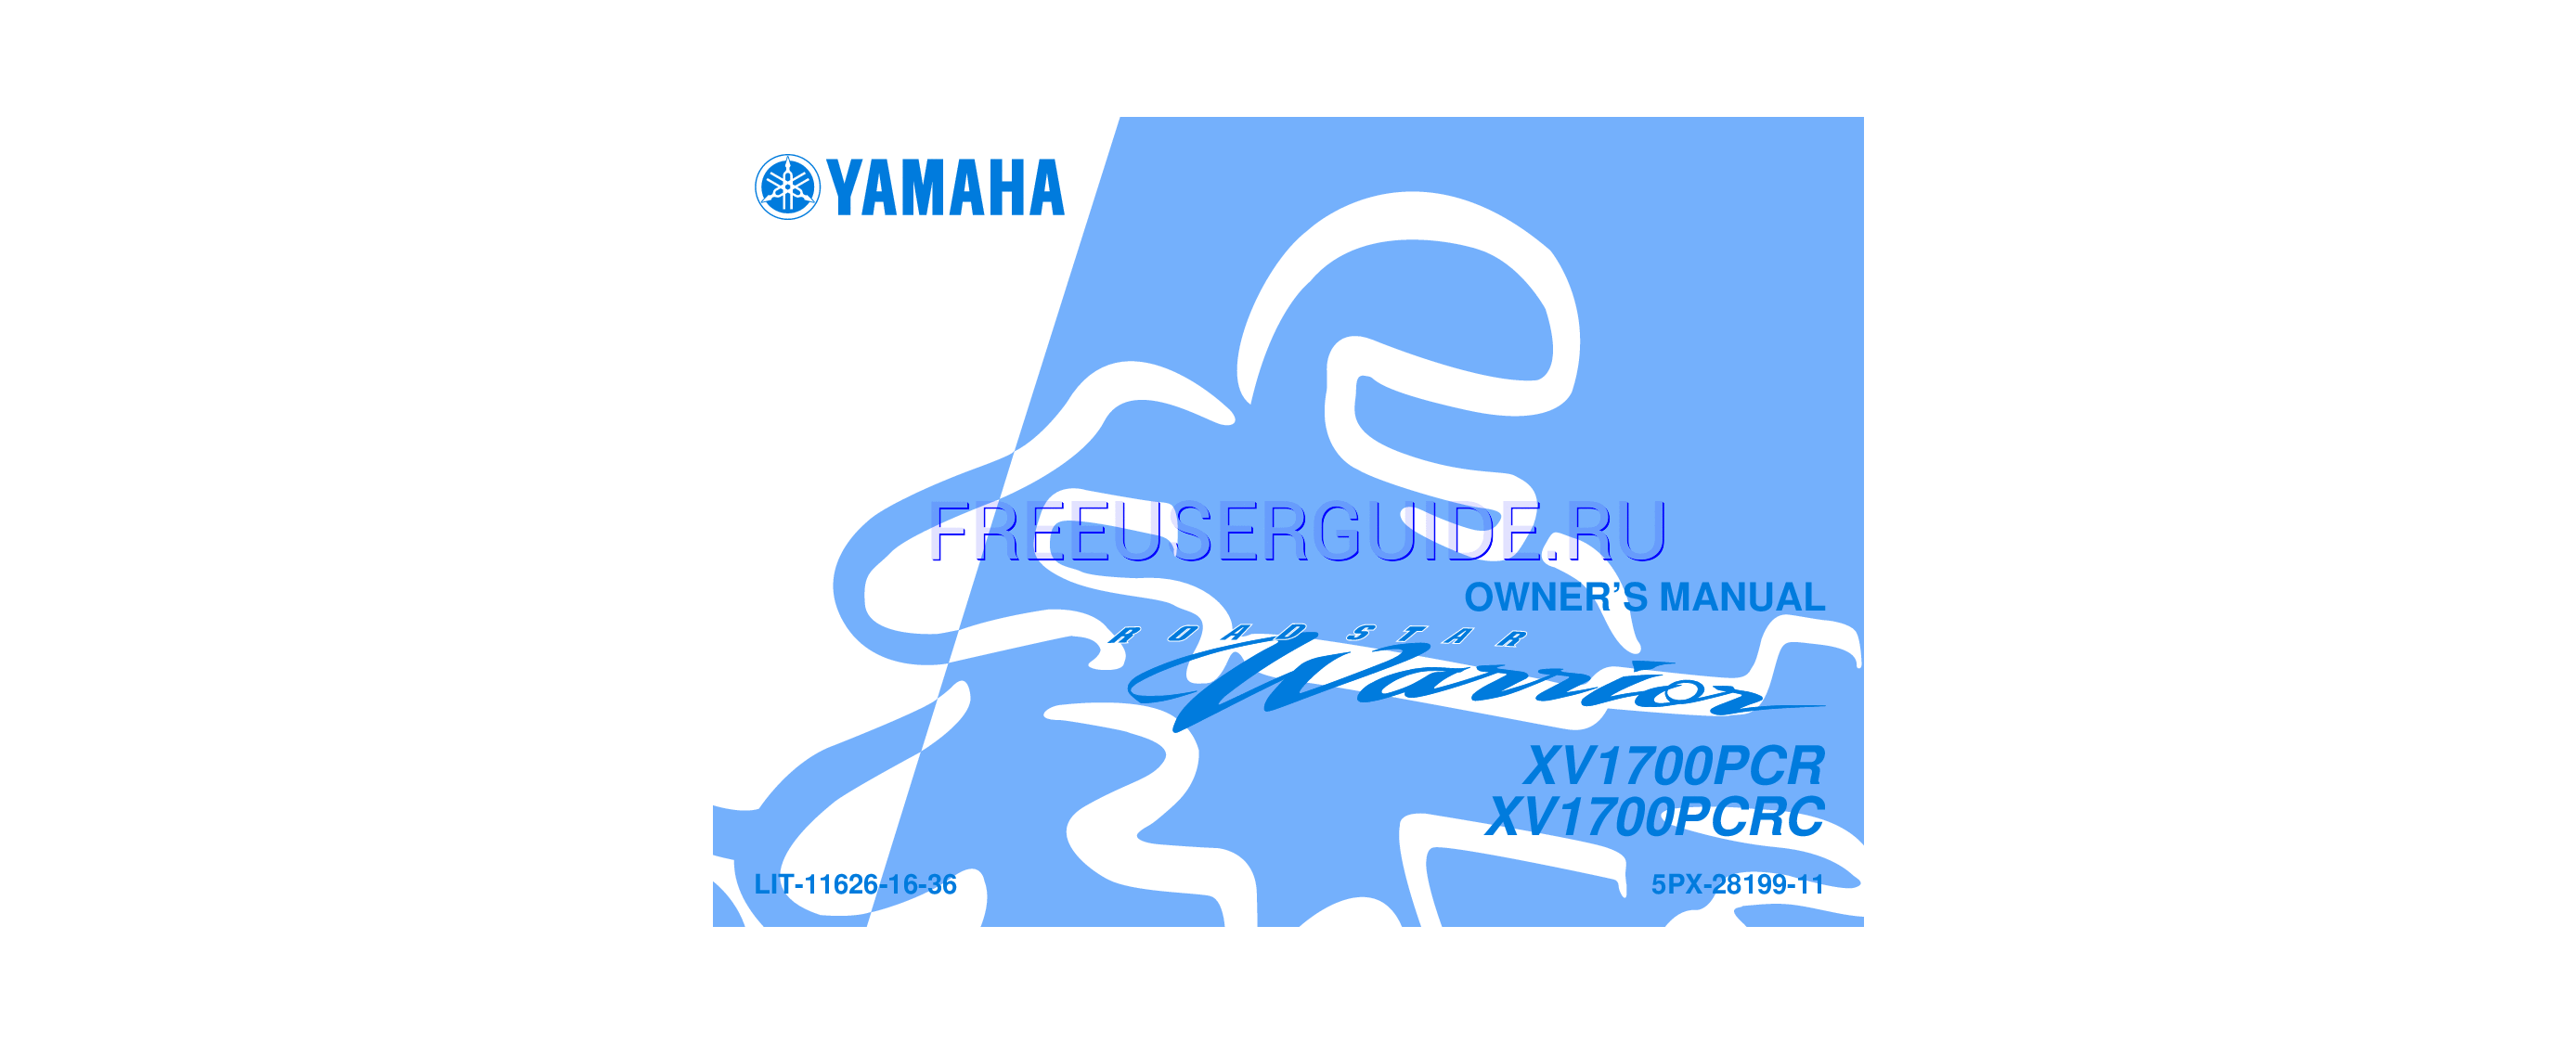 Read online Owner's Manual for Yamaha 2003 Warrior (Page 1)